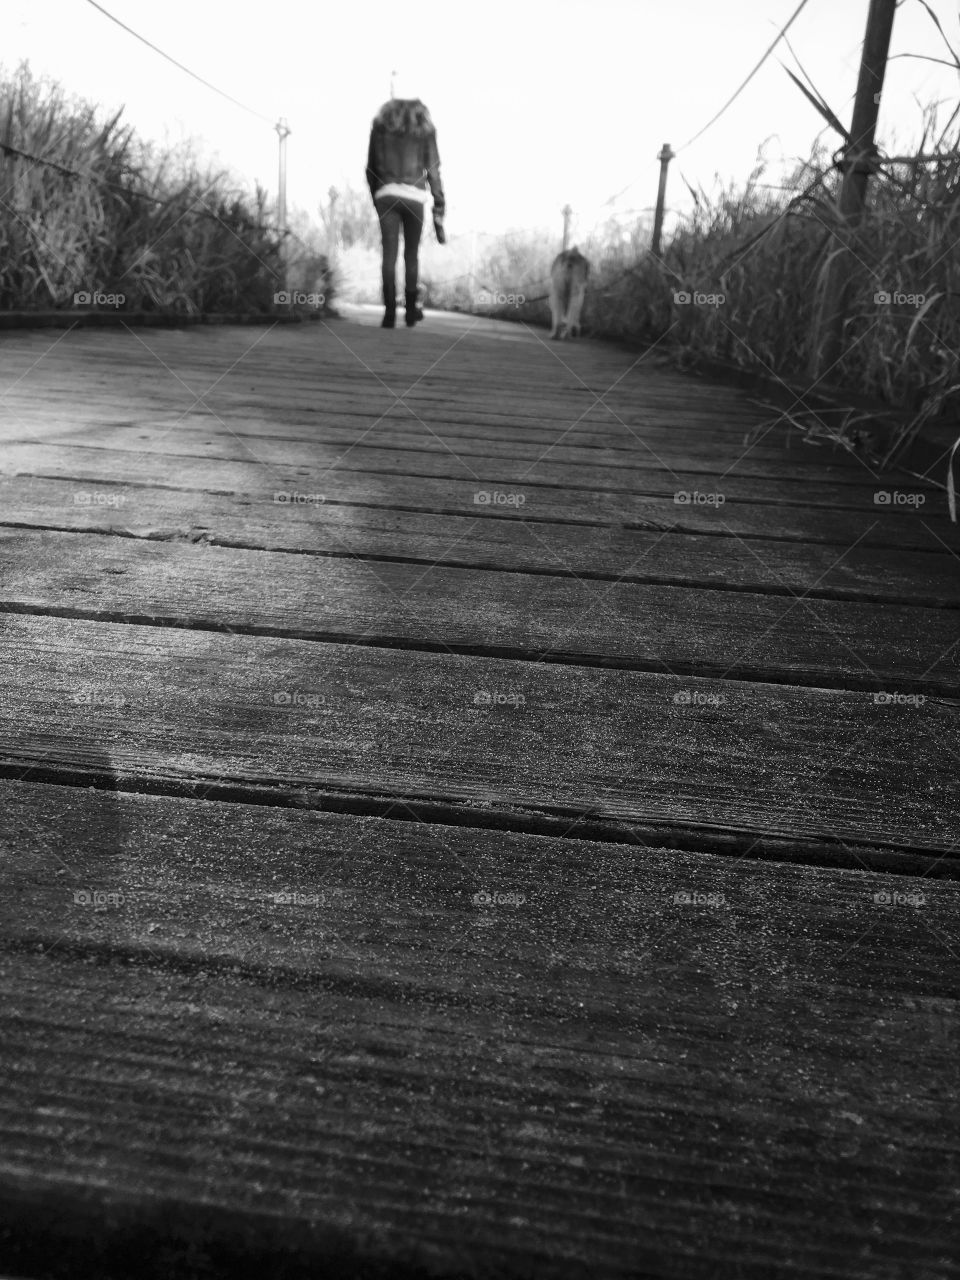 Boardwalk view of my daughter on a walk